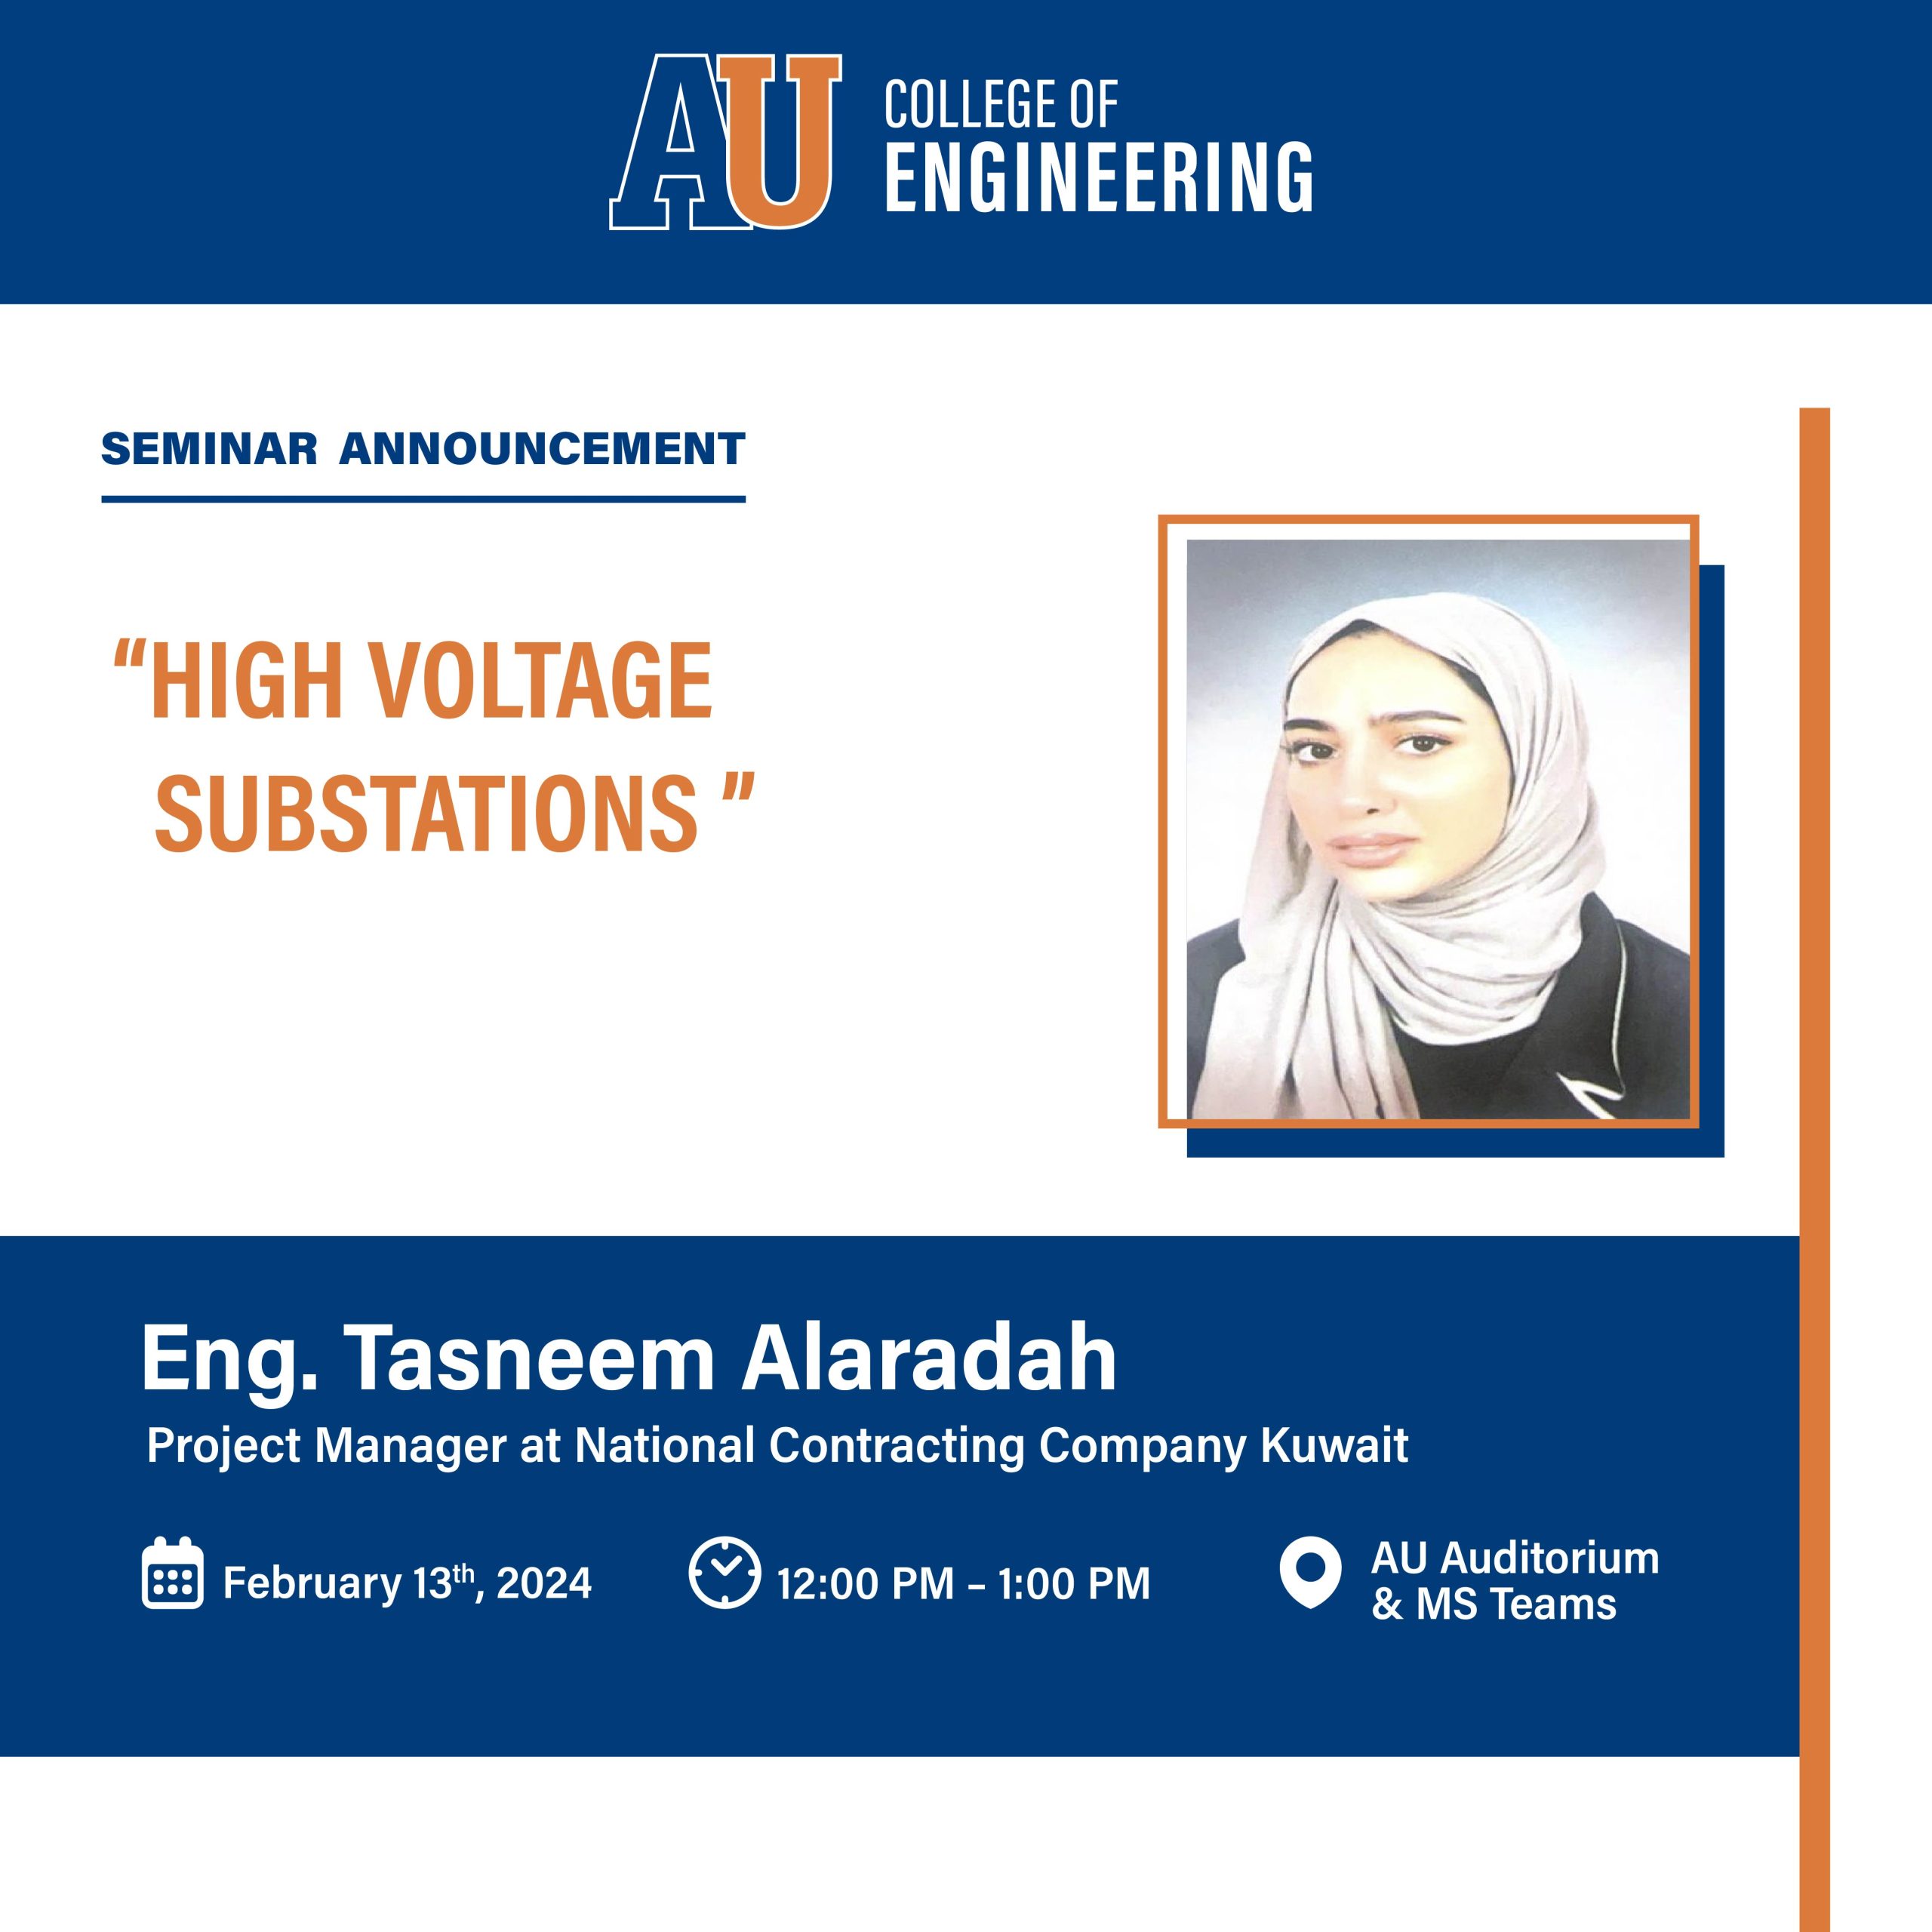 HIGH VOLTAGE SUBSTATIONS